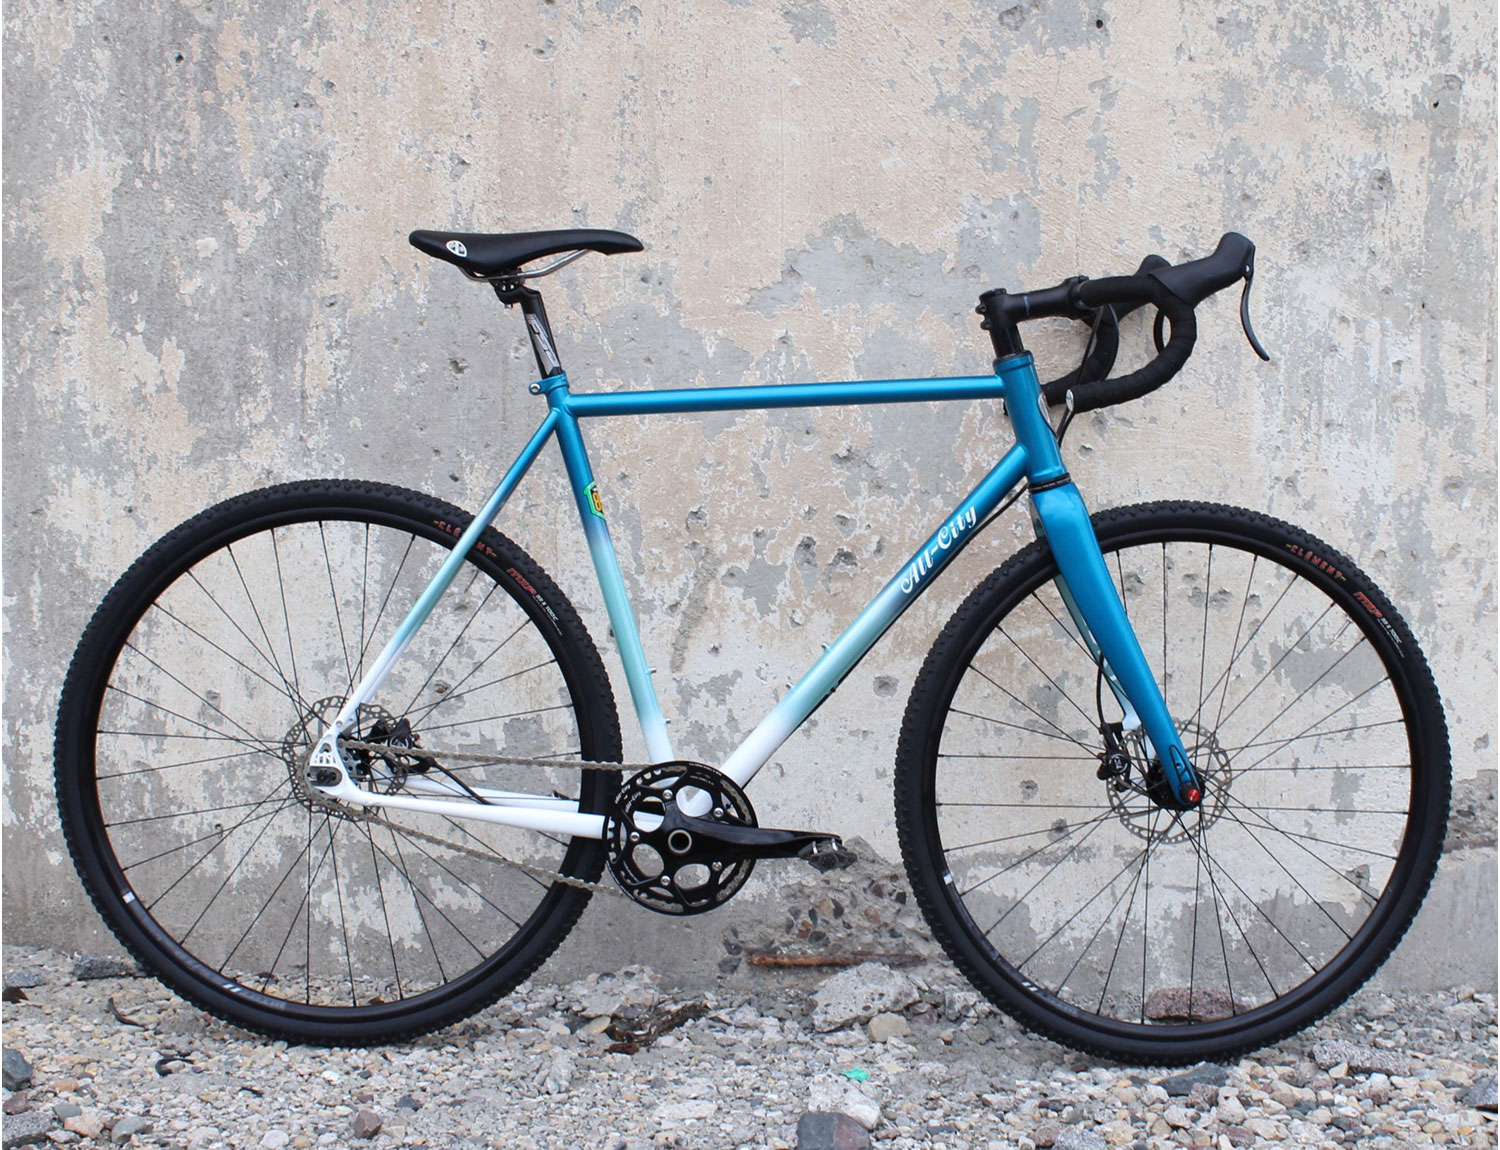 Are AllCity Bikes Worth Buying? Read our Review